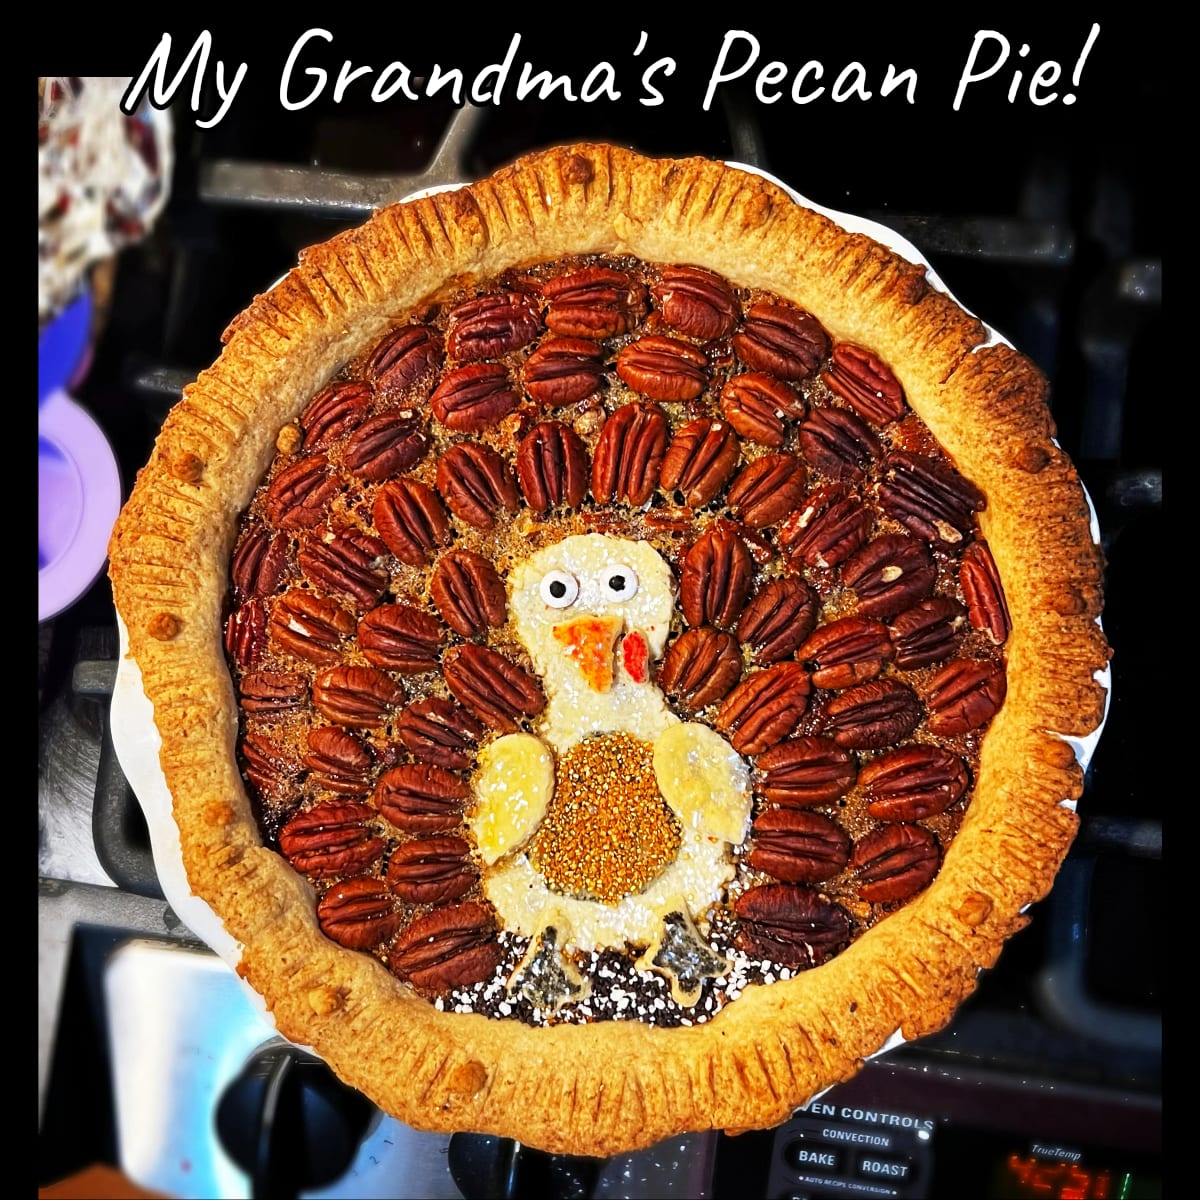 Grandma's old-fashioned pecan pie for Thanksgiving potluck we do each year as a family reunion